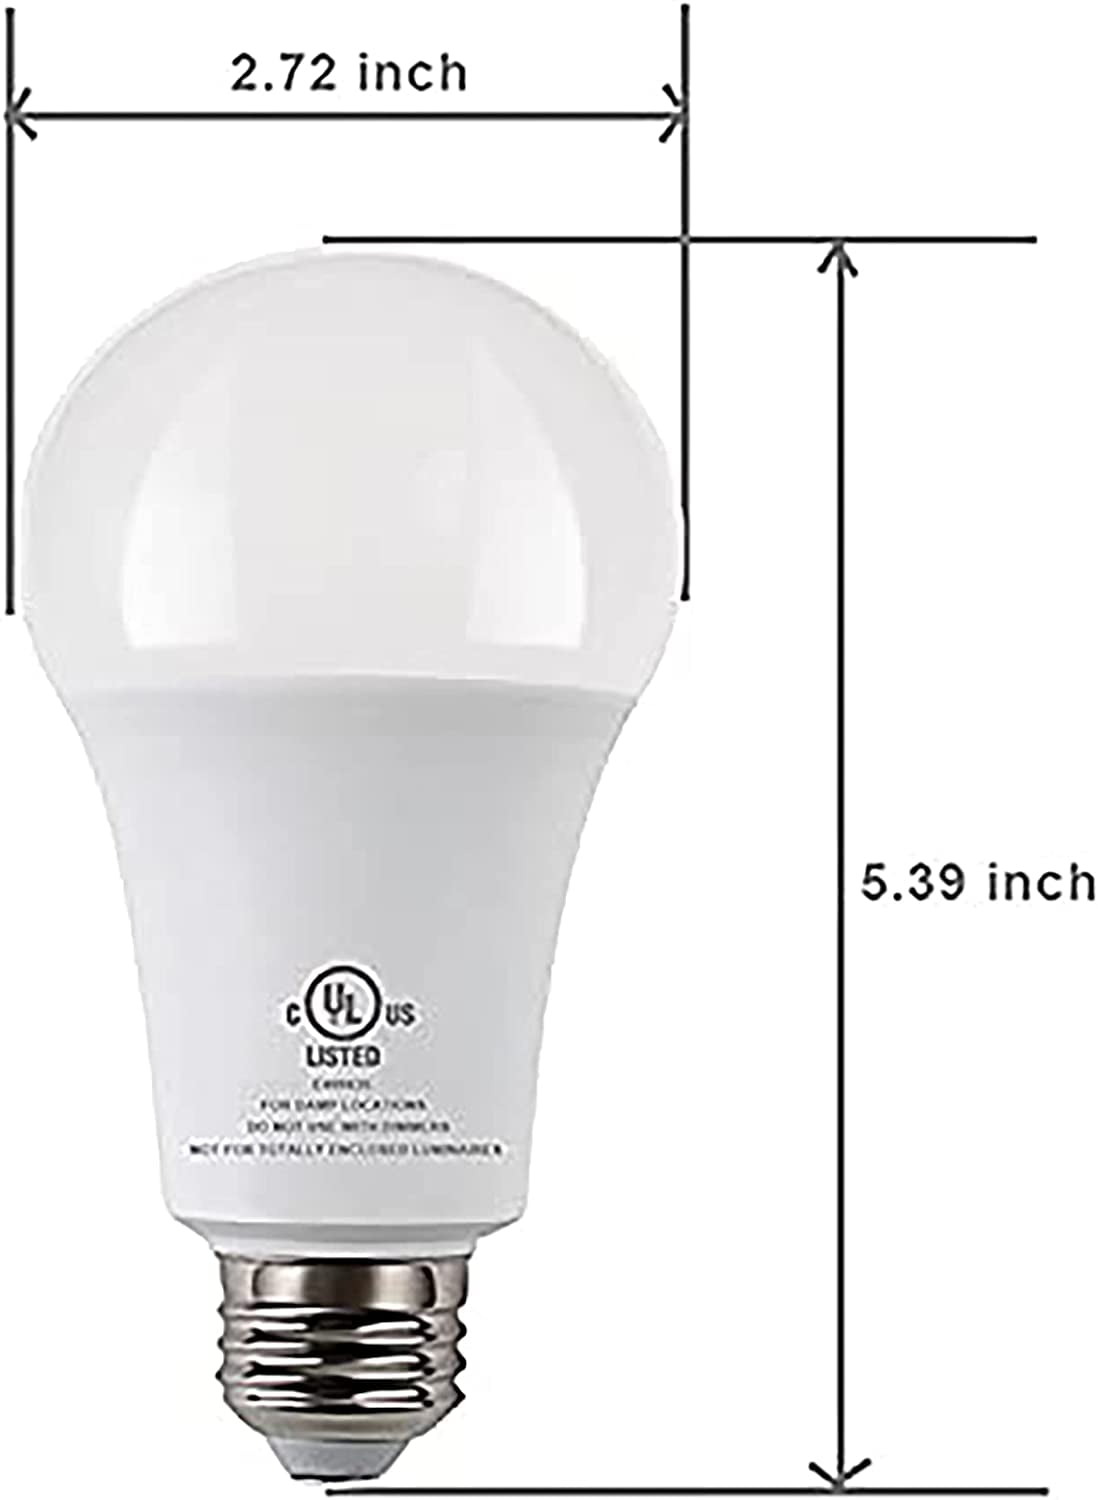 civaza Battery Operated Light Bulbs with Remote,Rechargeable Emergency  Bulbs for Power Outage,Stay Lights Up When Power Failure,Wireless Light  Bulbs